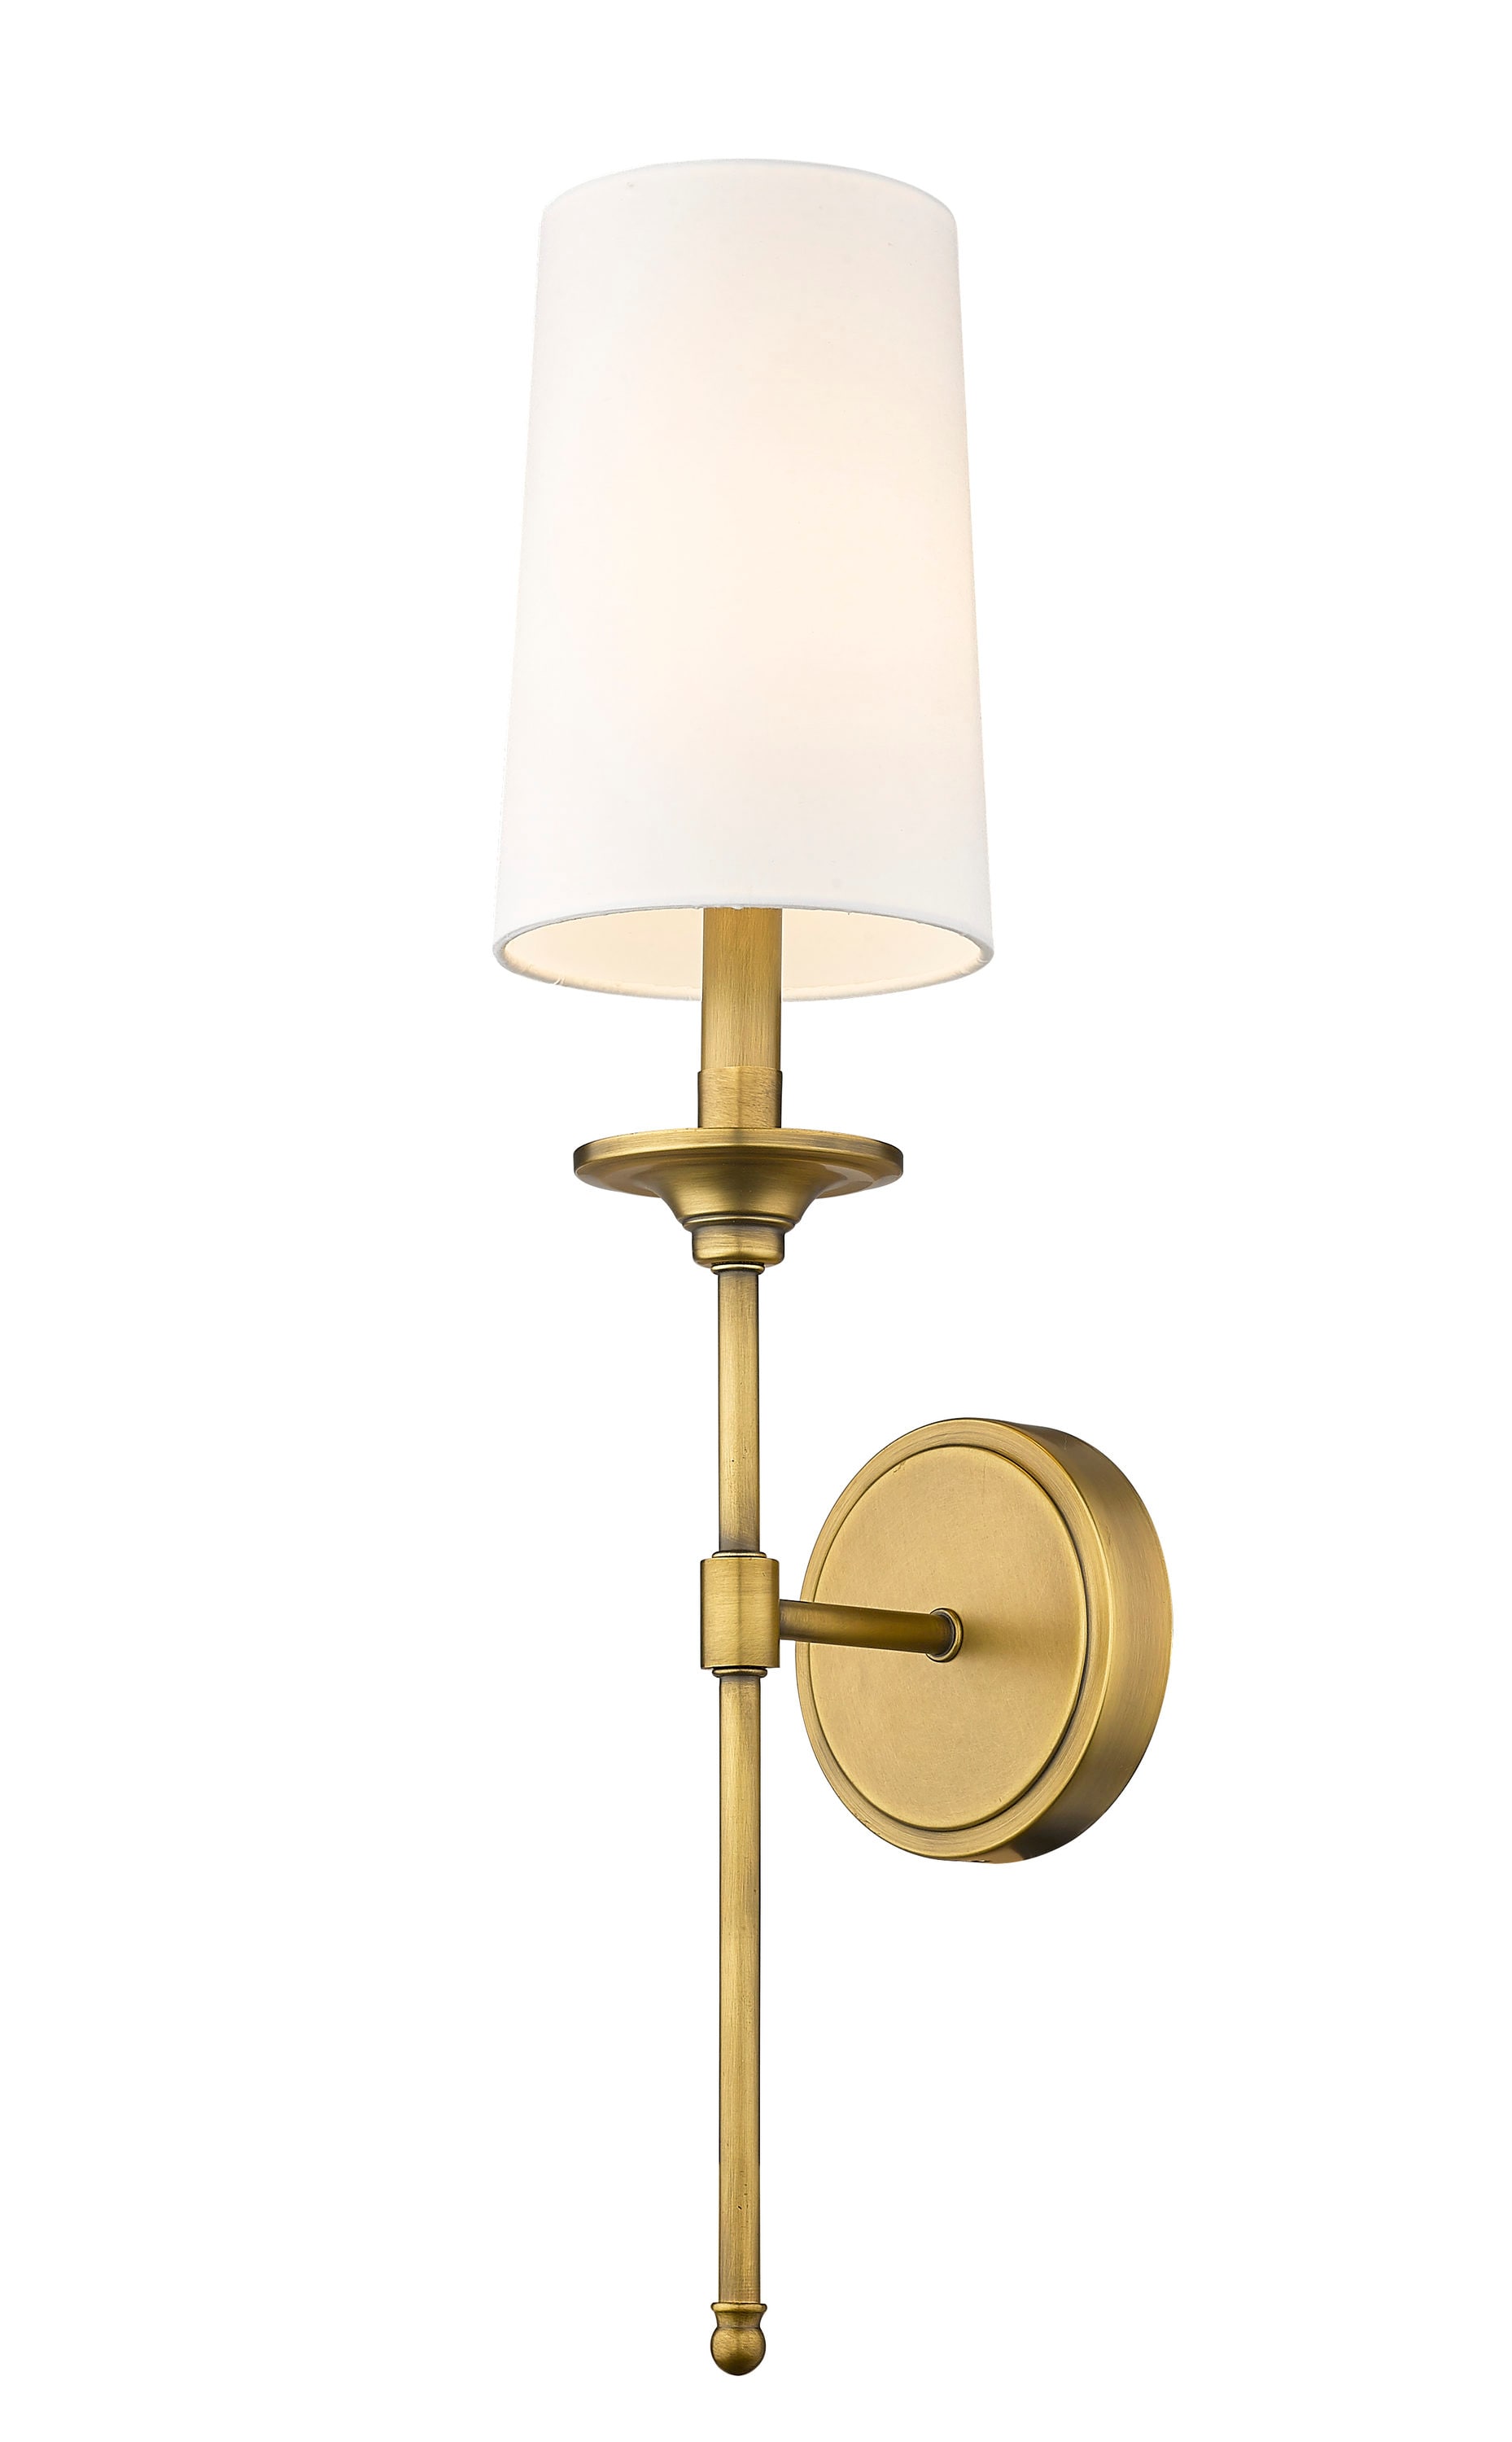 Z-Lite Emily 5.5-in W 1-Light Rubbed Brass Transitional Wall Sconce in ...